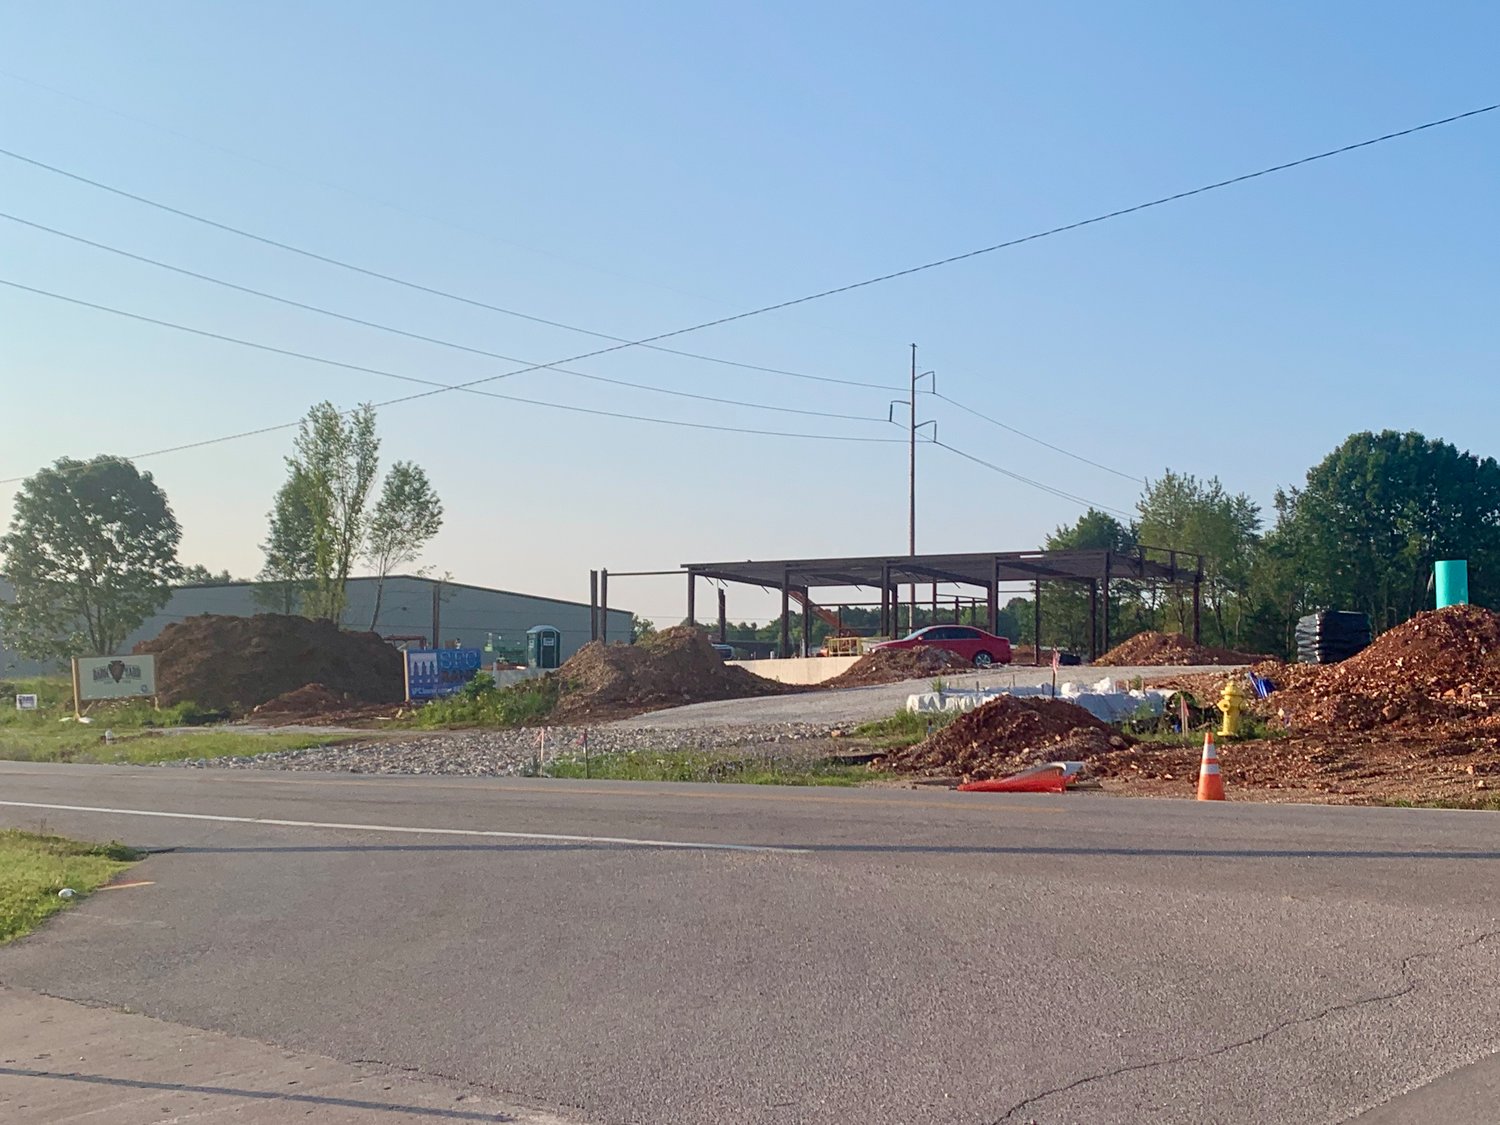 A building is beginning to take shape at the site of the Bark Yard development at 3110 E. Cherry St.